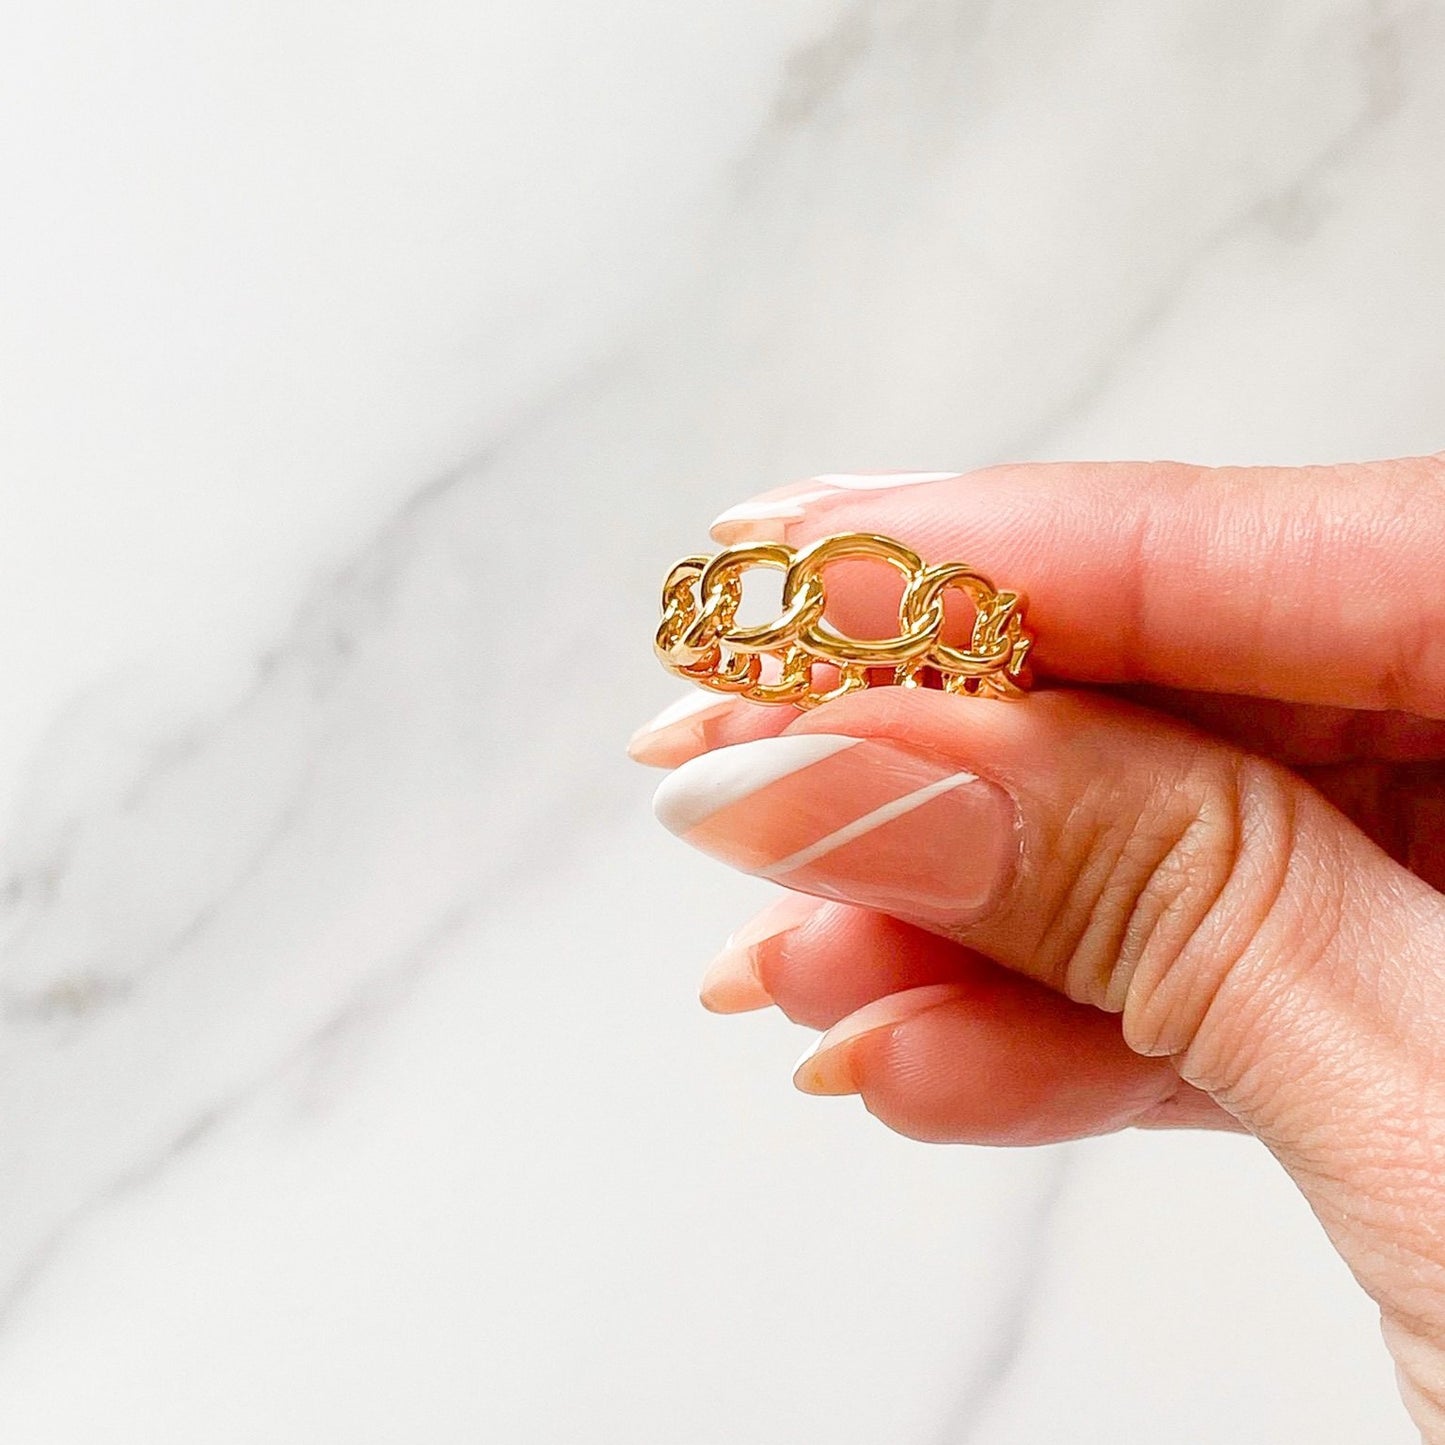 Mara gold filled ring by ISVI Boutique Miami. Water-resistant ring